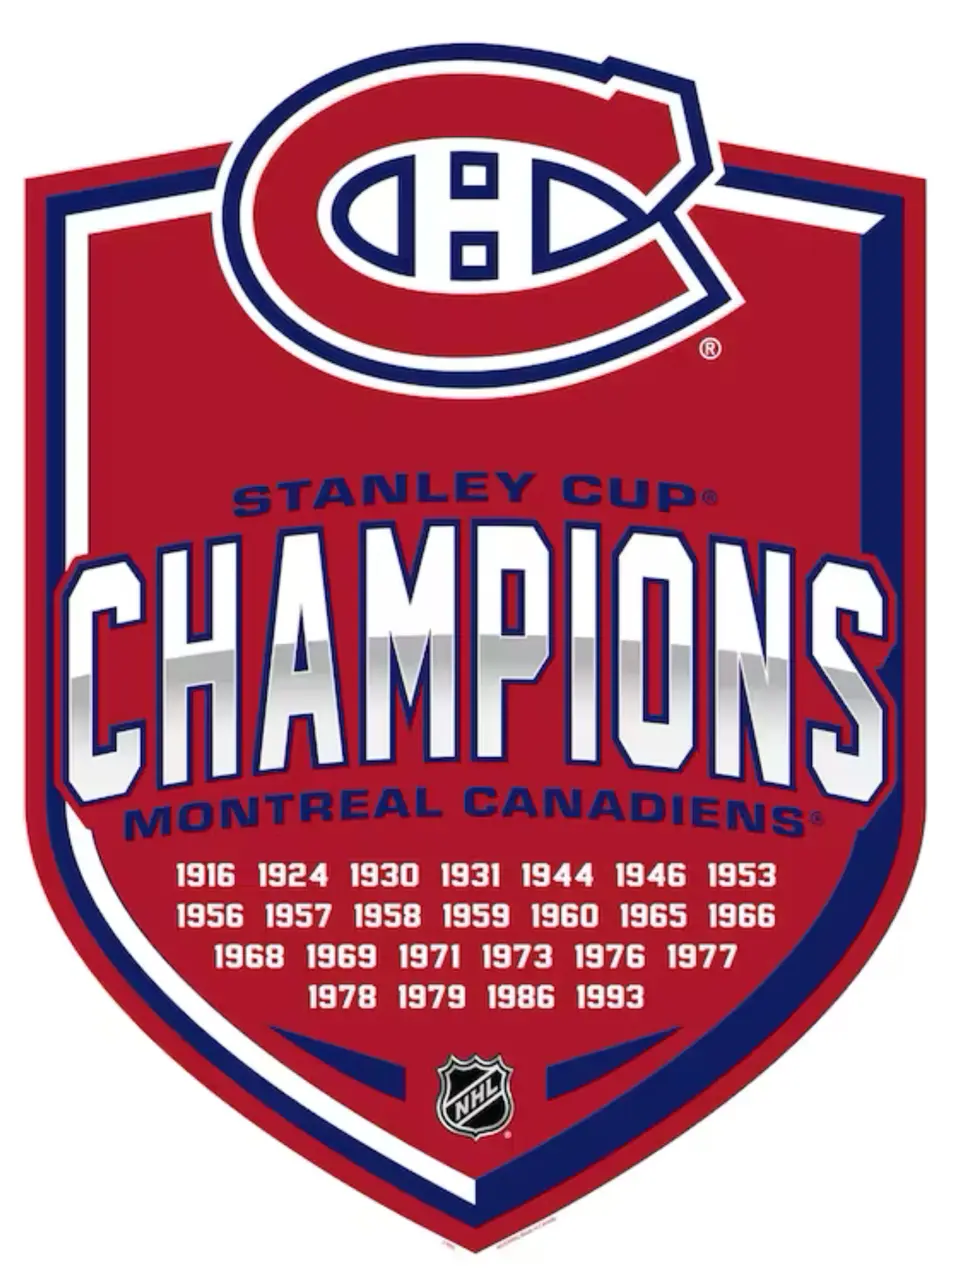 MONTREAL CANADIENS (GO HABS GO!) - cover